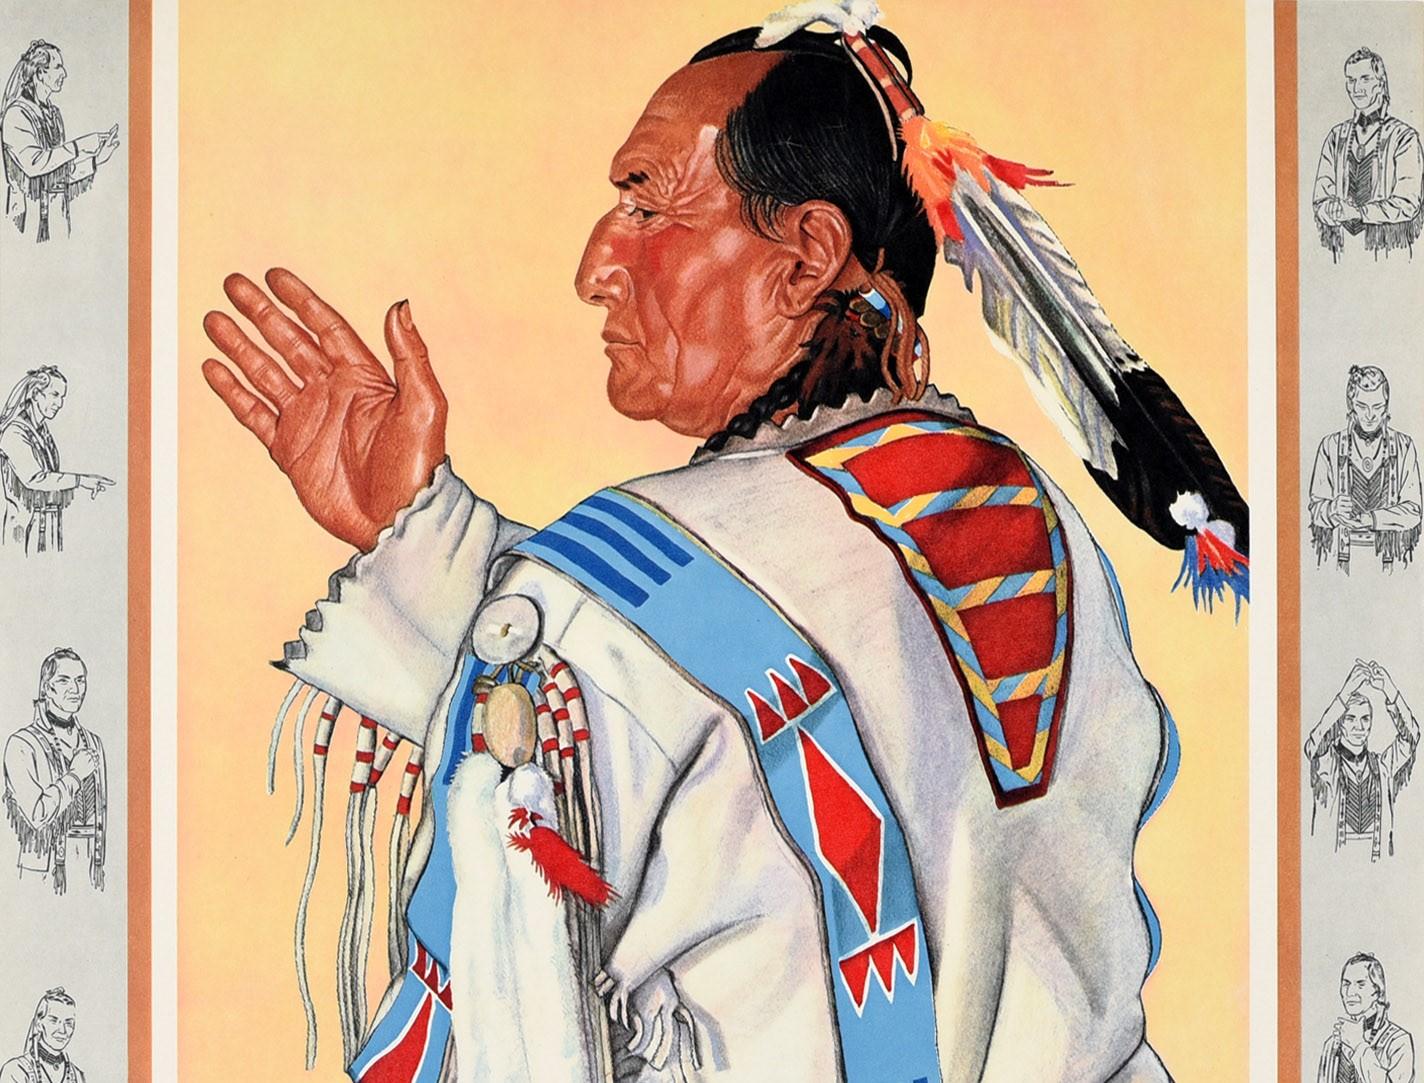 Original vintage travel advertising poster - Great Domes of the Incomparable Empire Builder - featuring a native American man wearing traditional clothing with a colourful bird feather headdress sitting on a red cushion and holding his hand up in